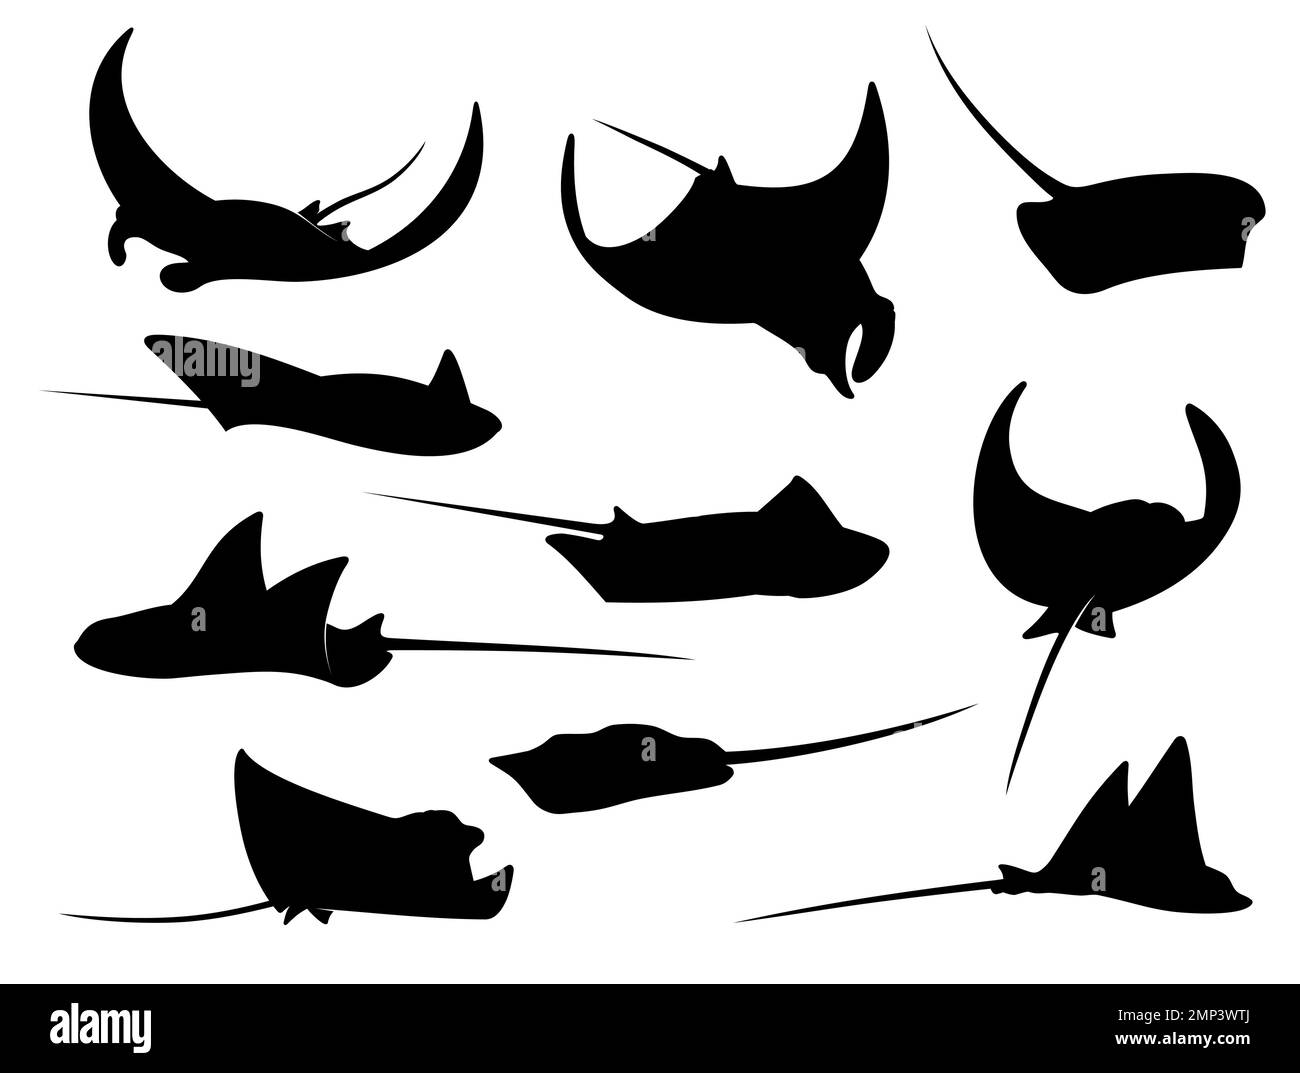 Manta ray, stingray or cramp fish silhouette. Vector animals of sea and ocean water swimming with waving fins and tails. Diving skate, stingray or eagle ray fish isolated symbols, underwater wildlife Stock Vector